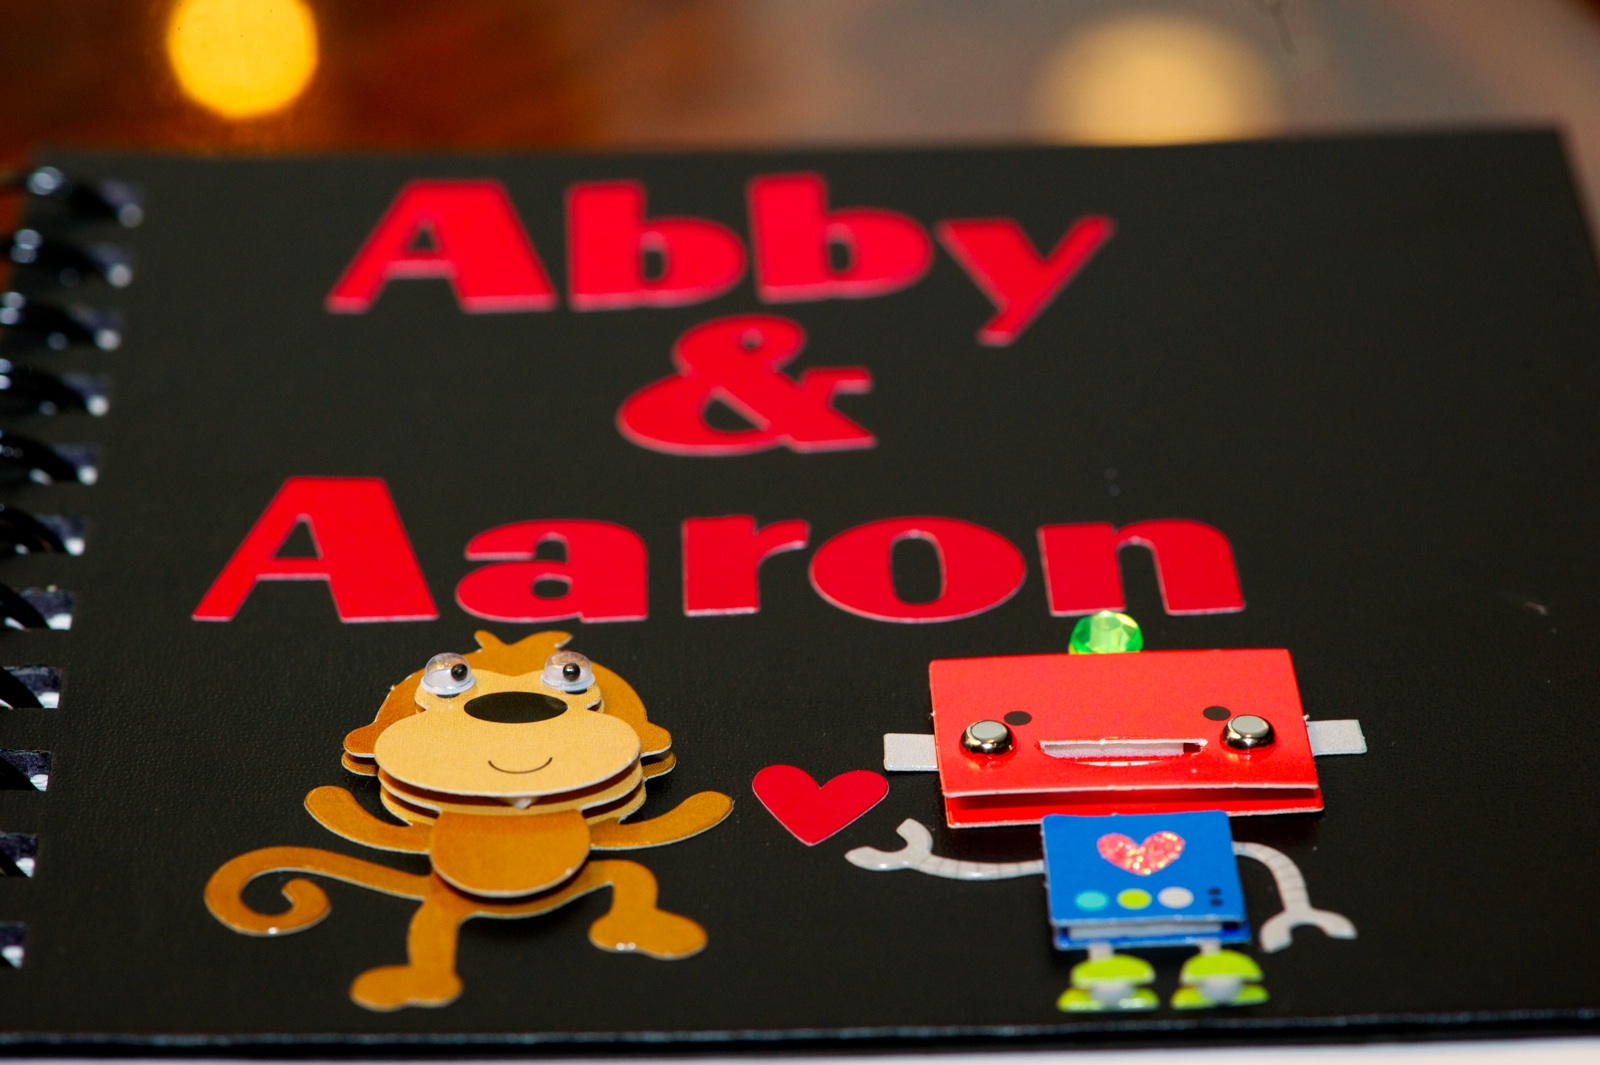 Abby & Aaron's Guest Book